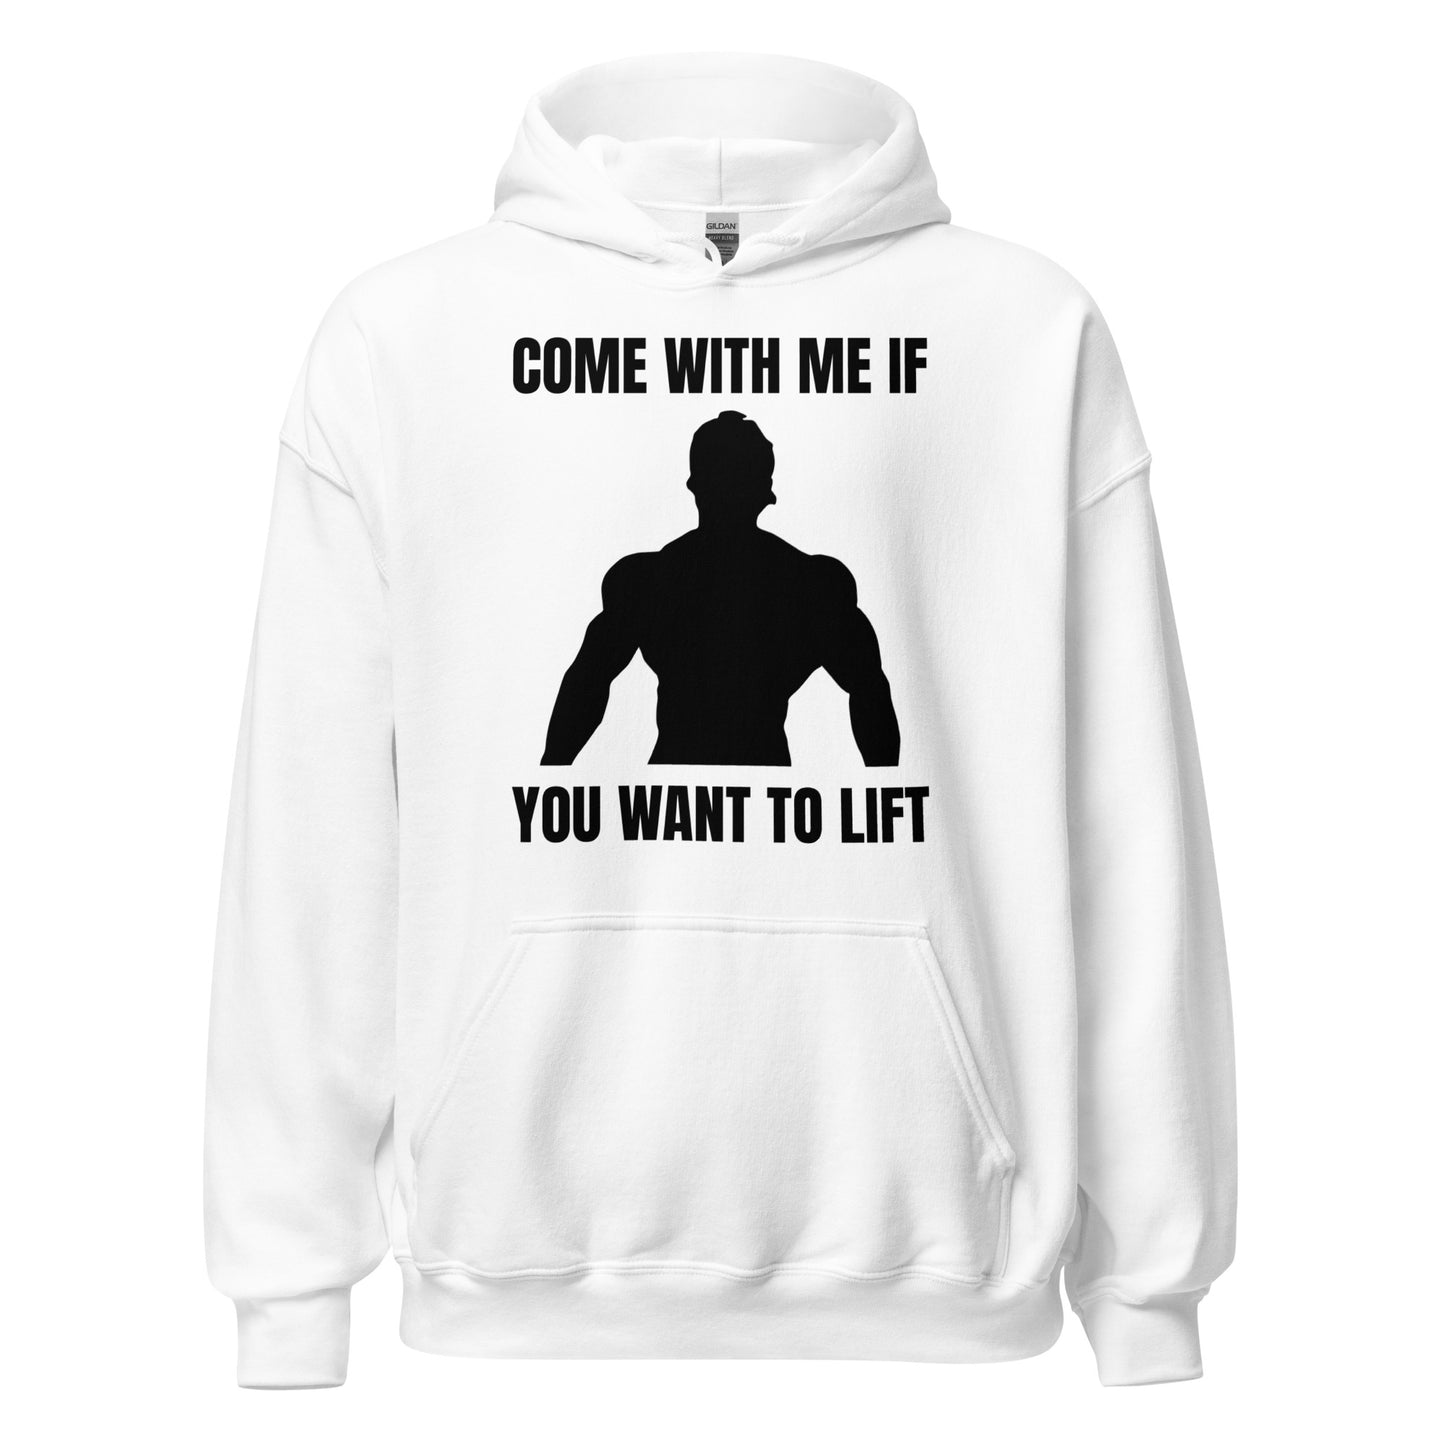 Come with Me if You Want to Lift Hoodie in White